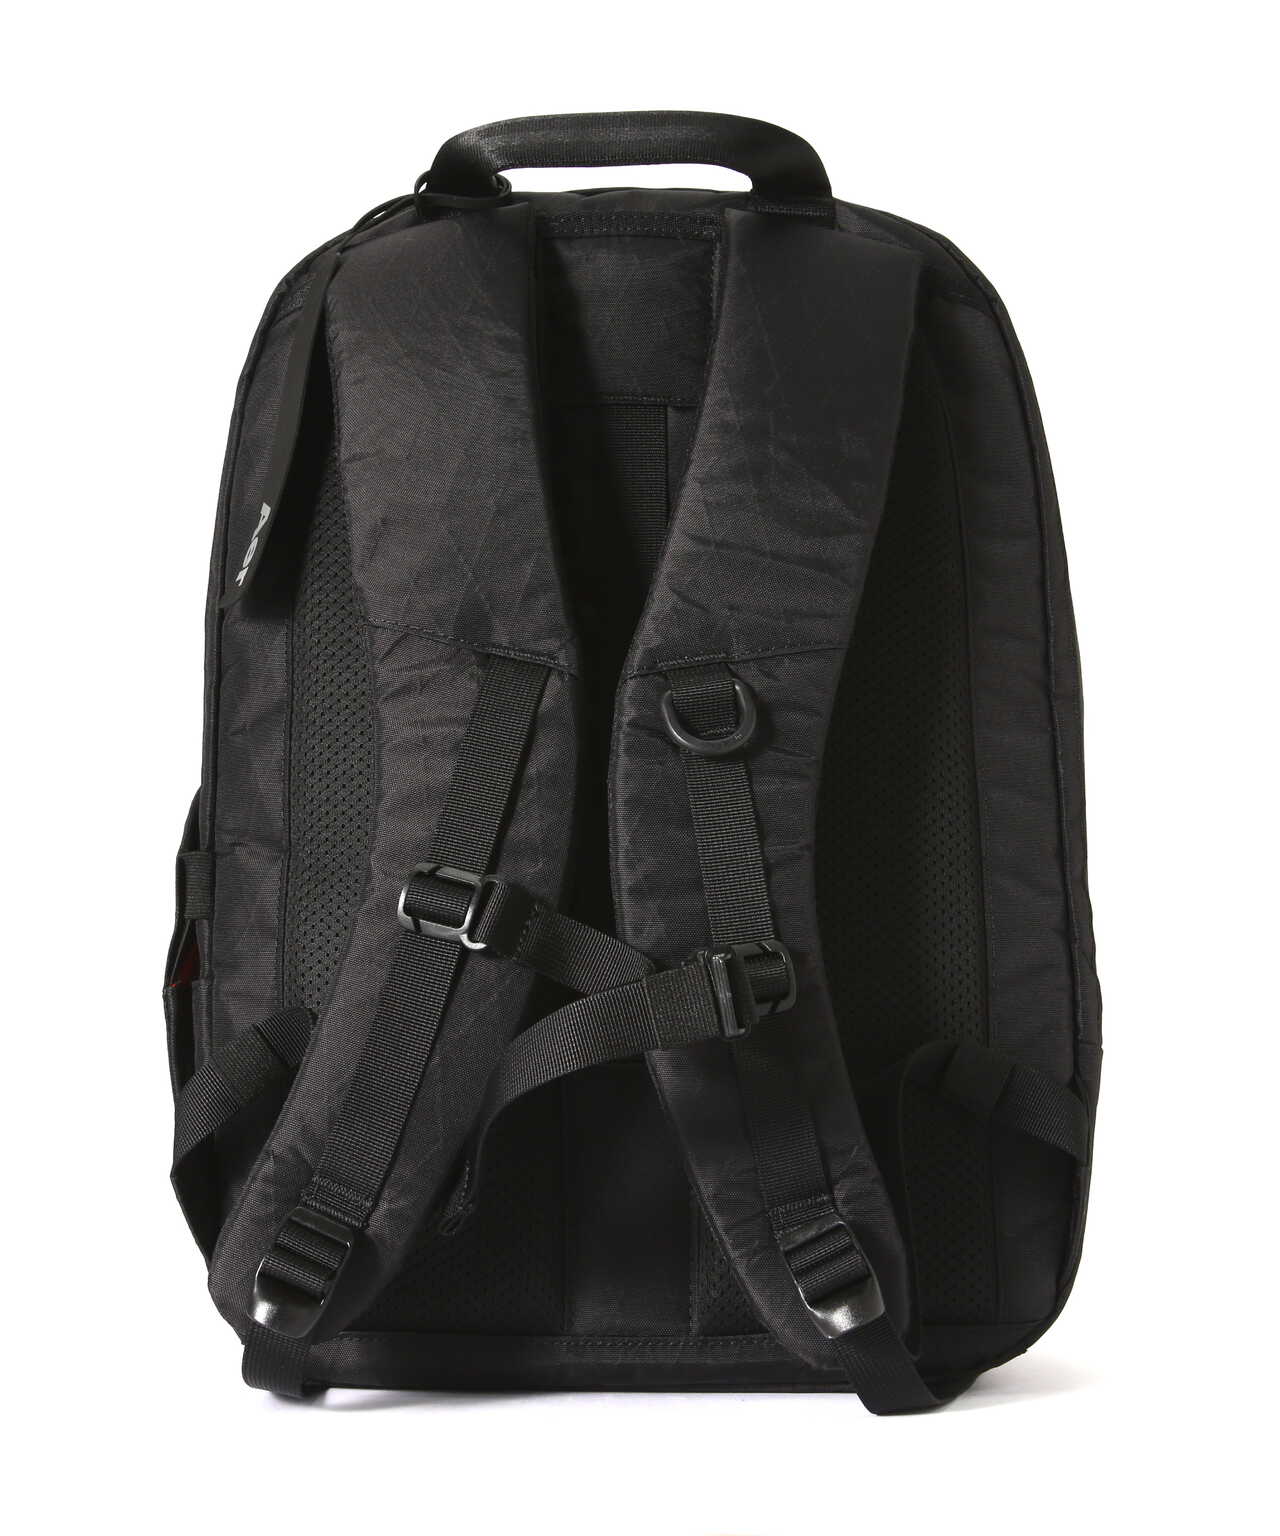 Aer（エアー）Day Pack2 X-PAC 高耐水・高耐久バッグ 正規商品148L